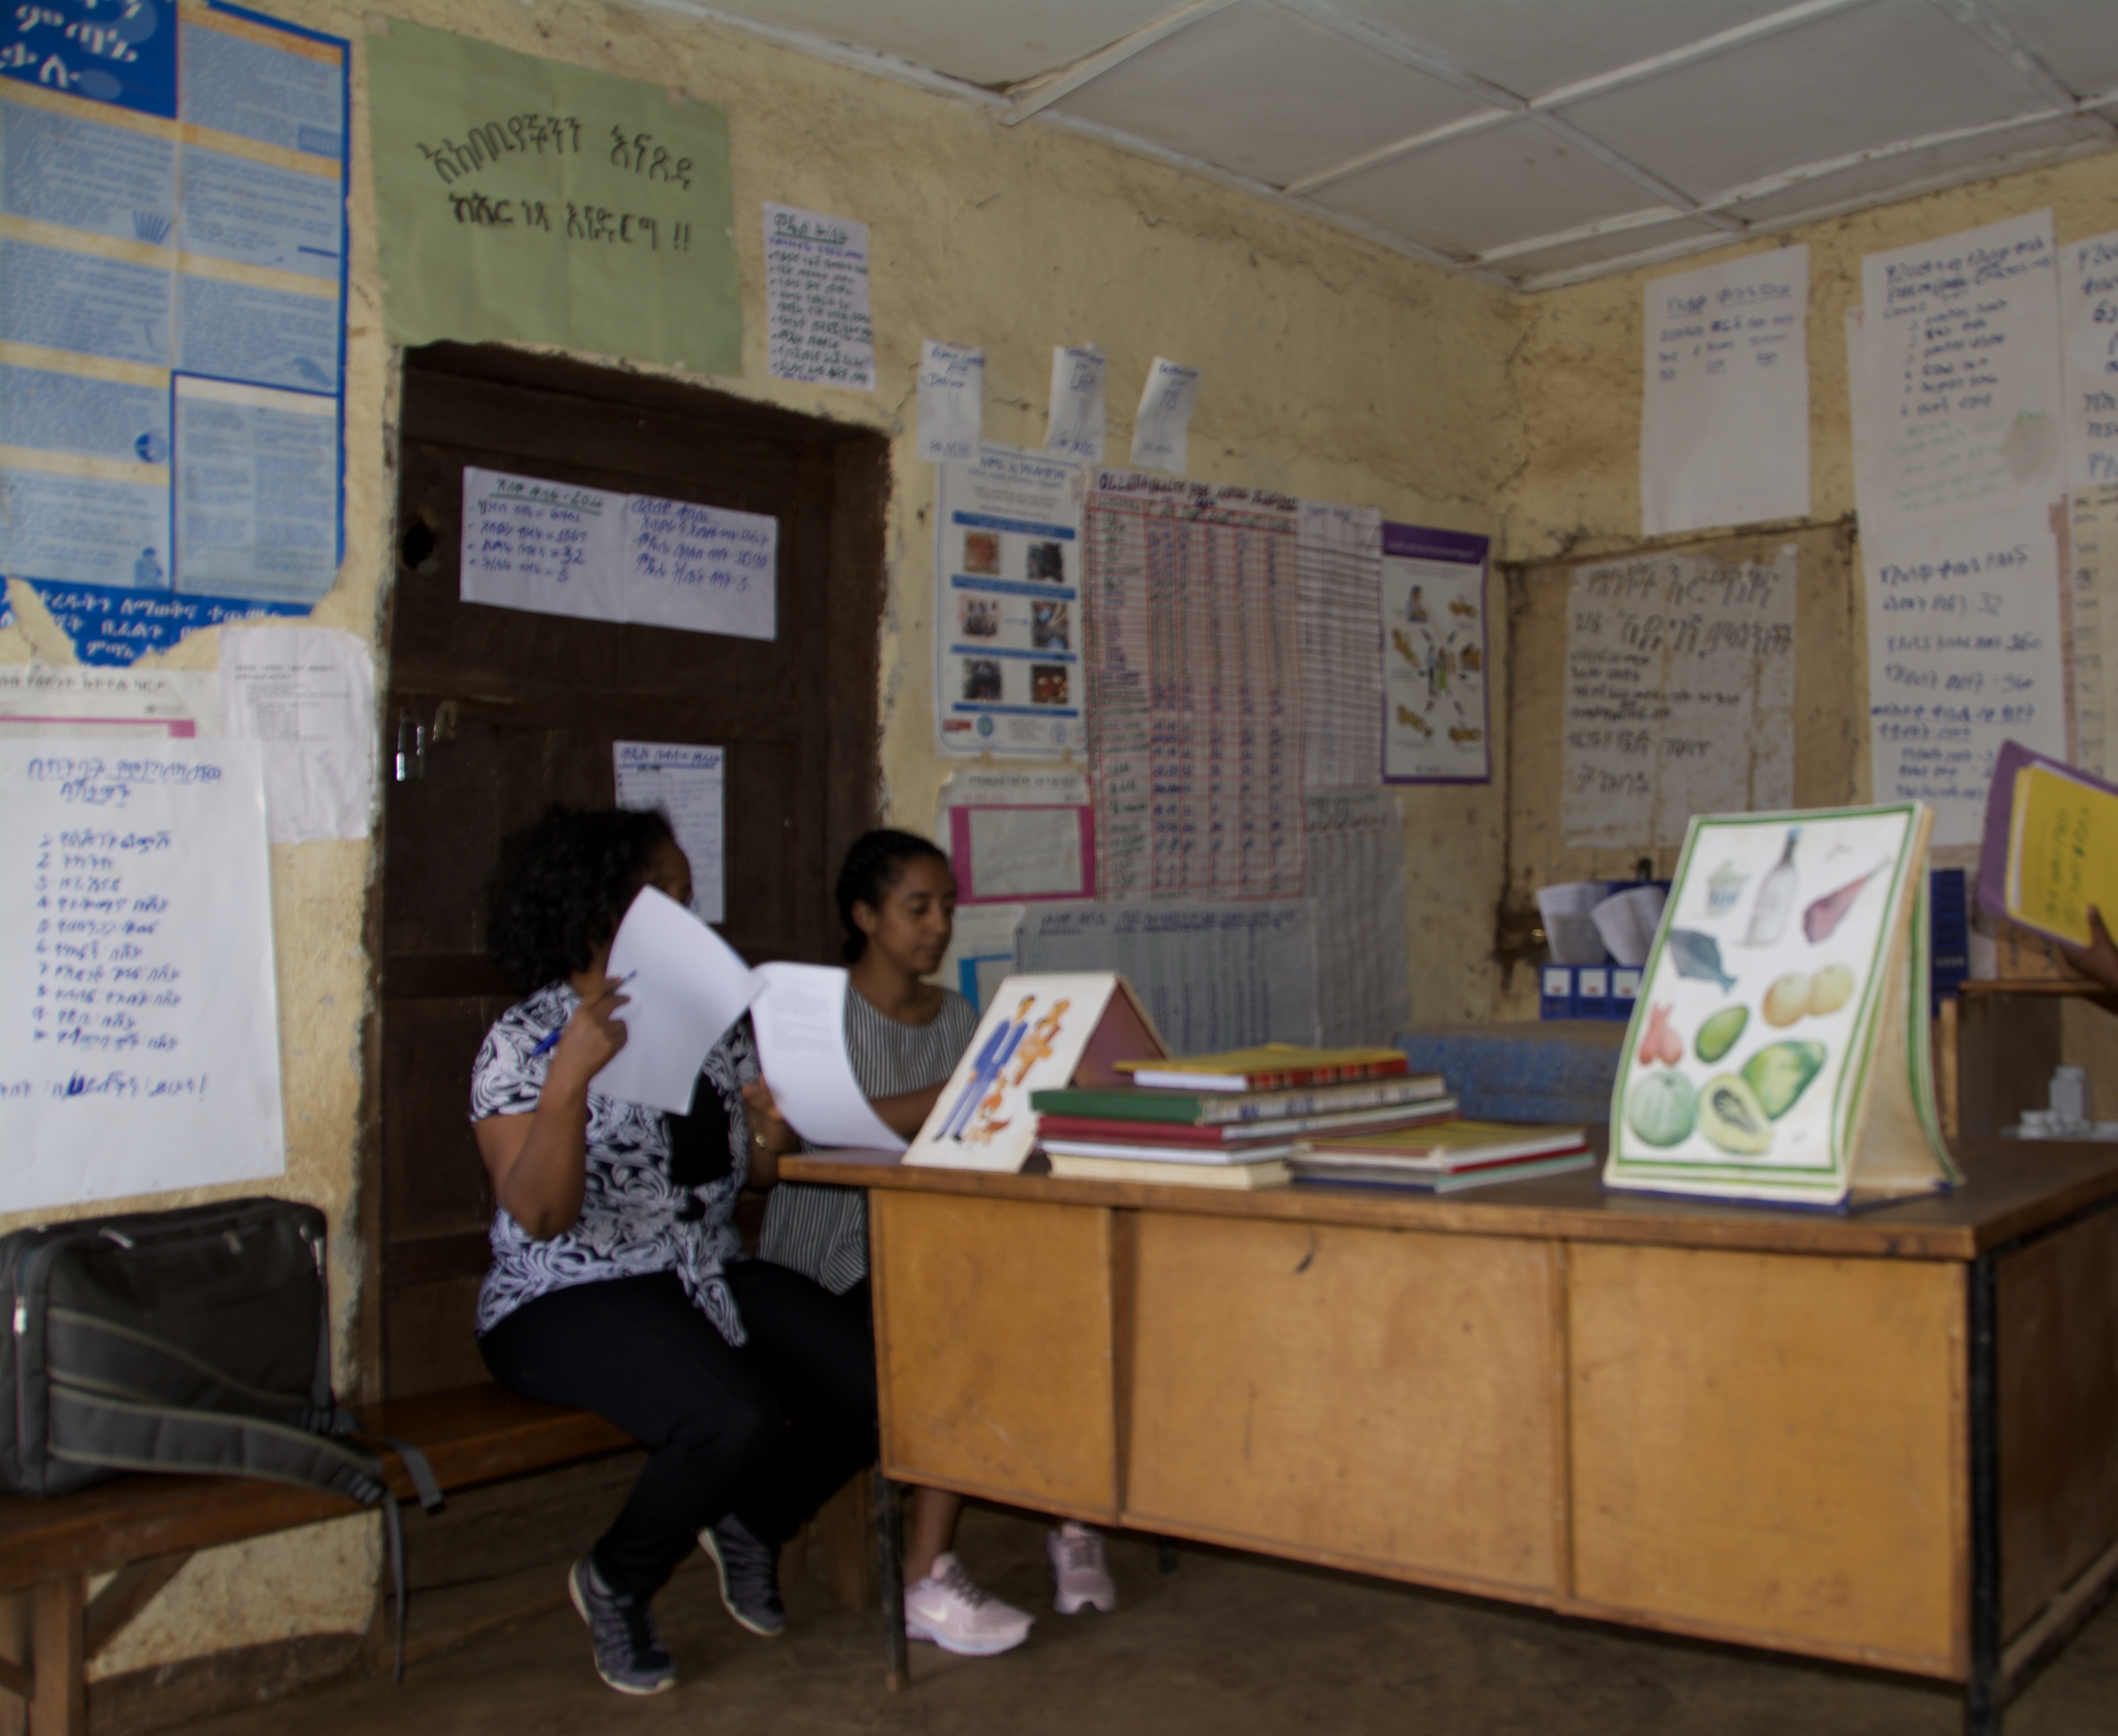 An ORCA analyst interviews a Health Extension Worker